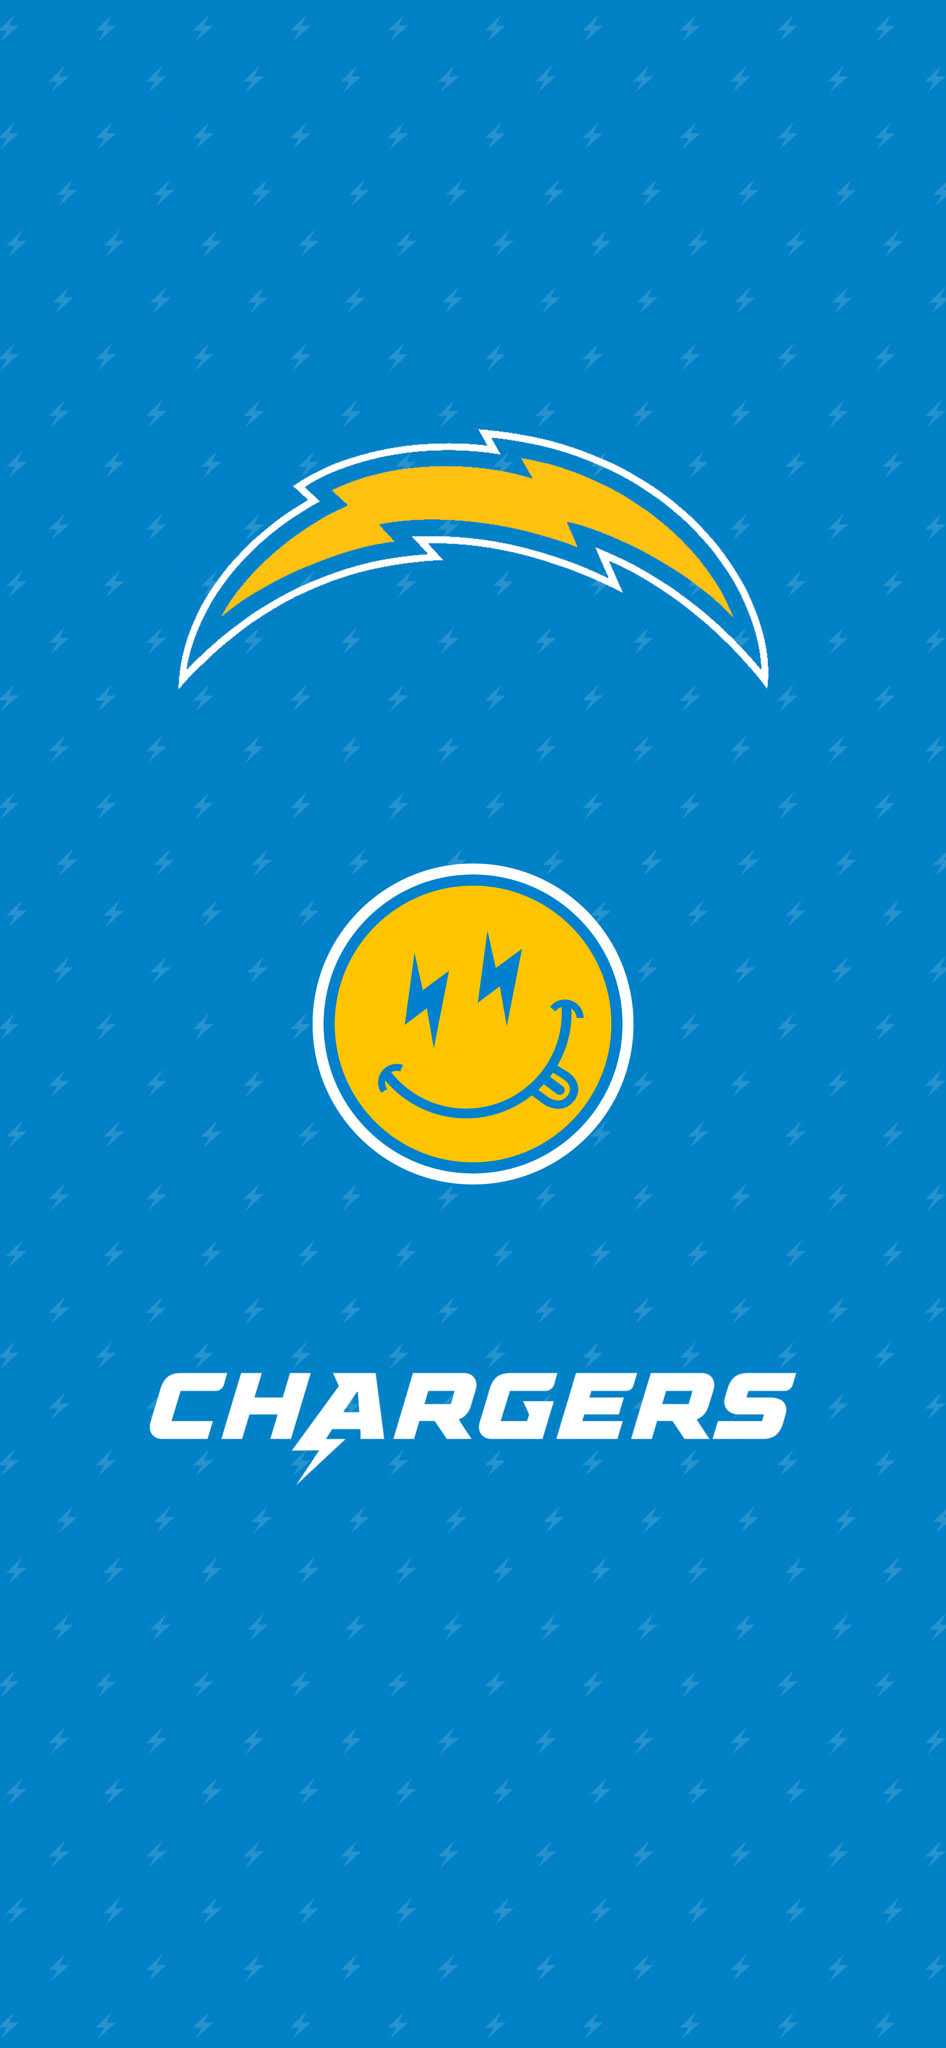 Chargers iPhone Wallpaper Free HD Wallpaper